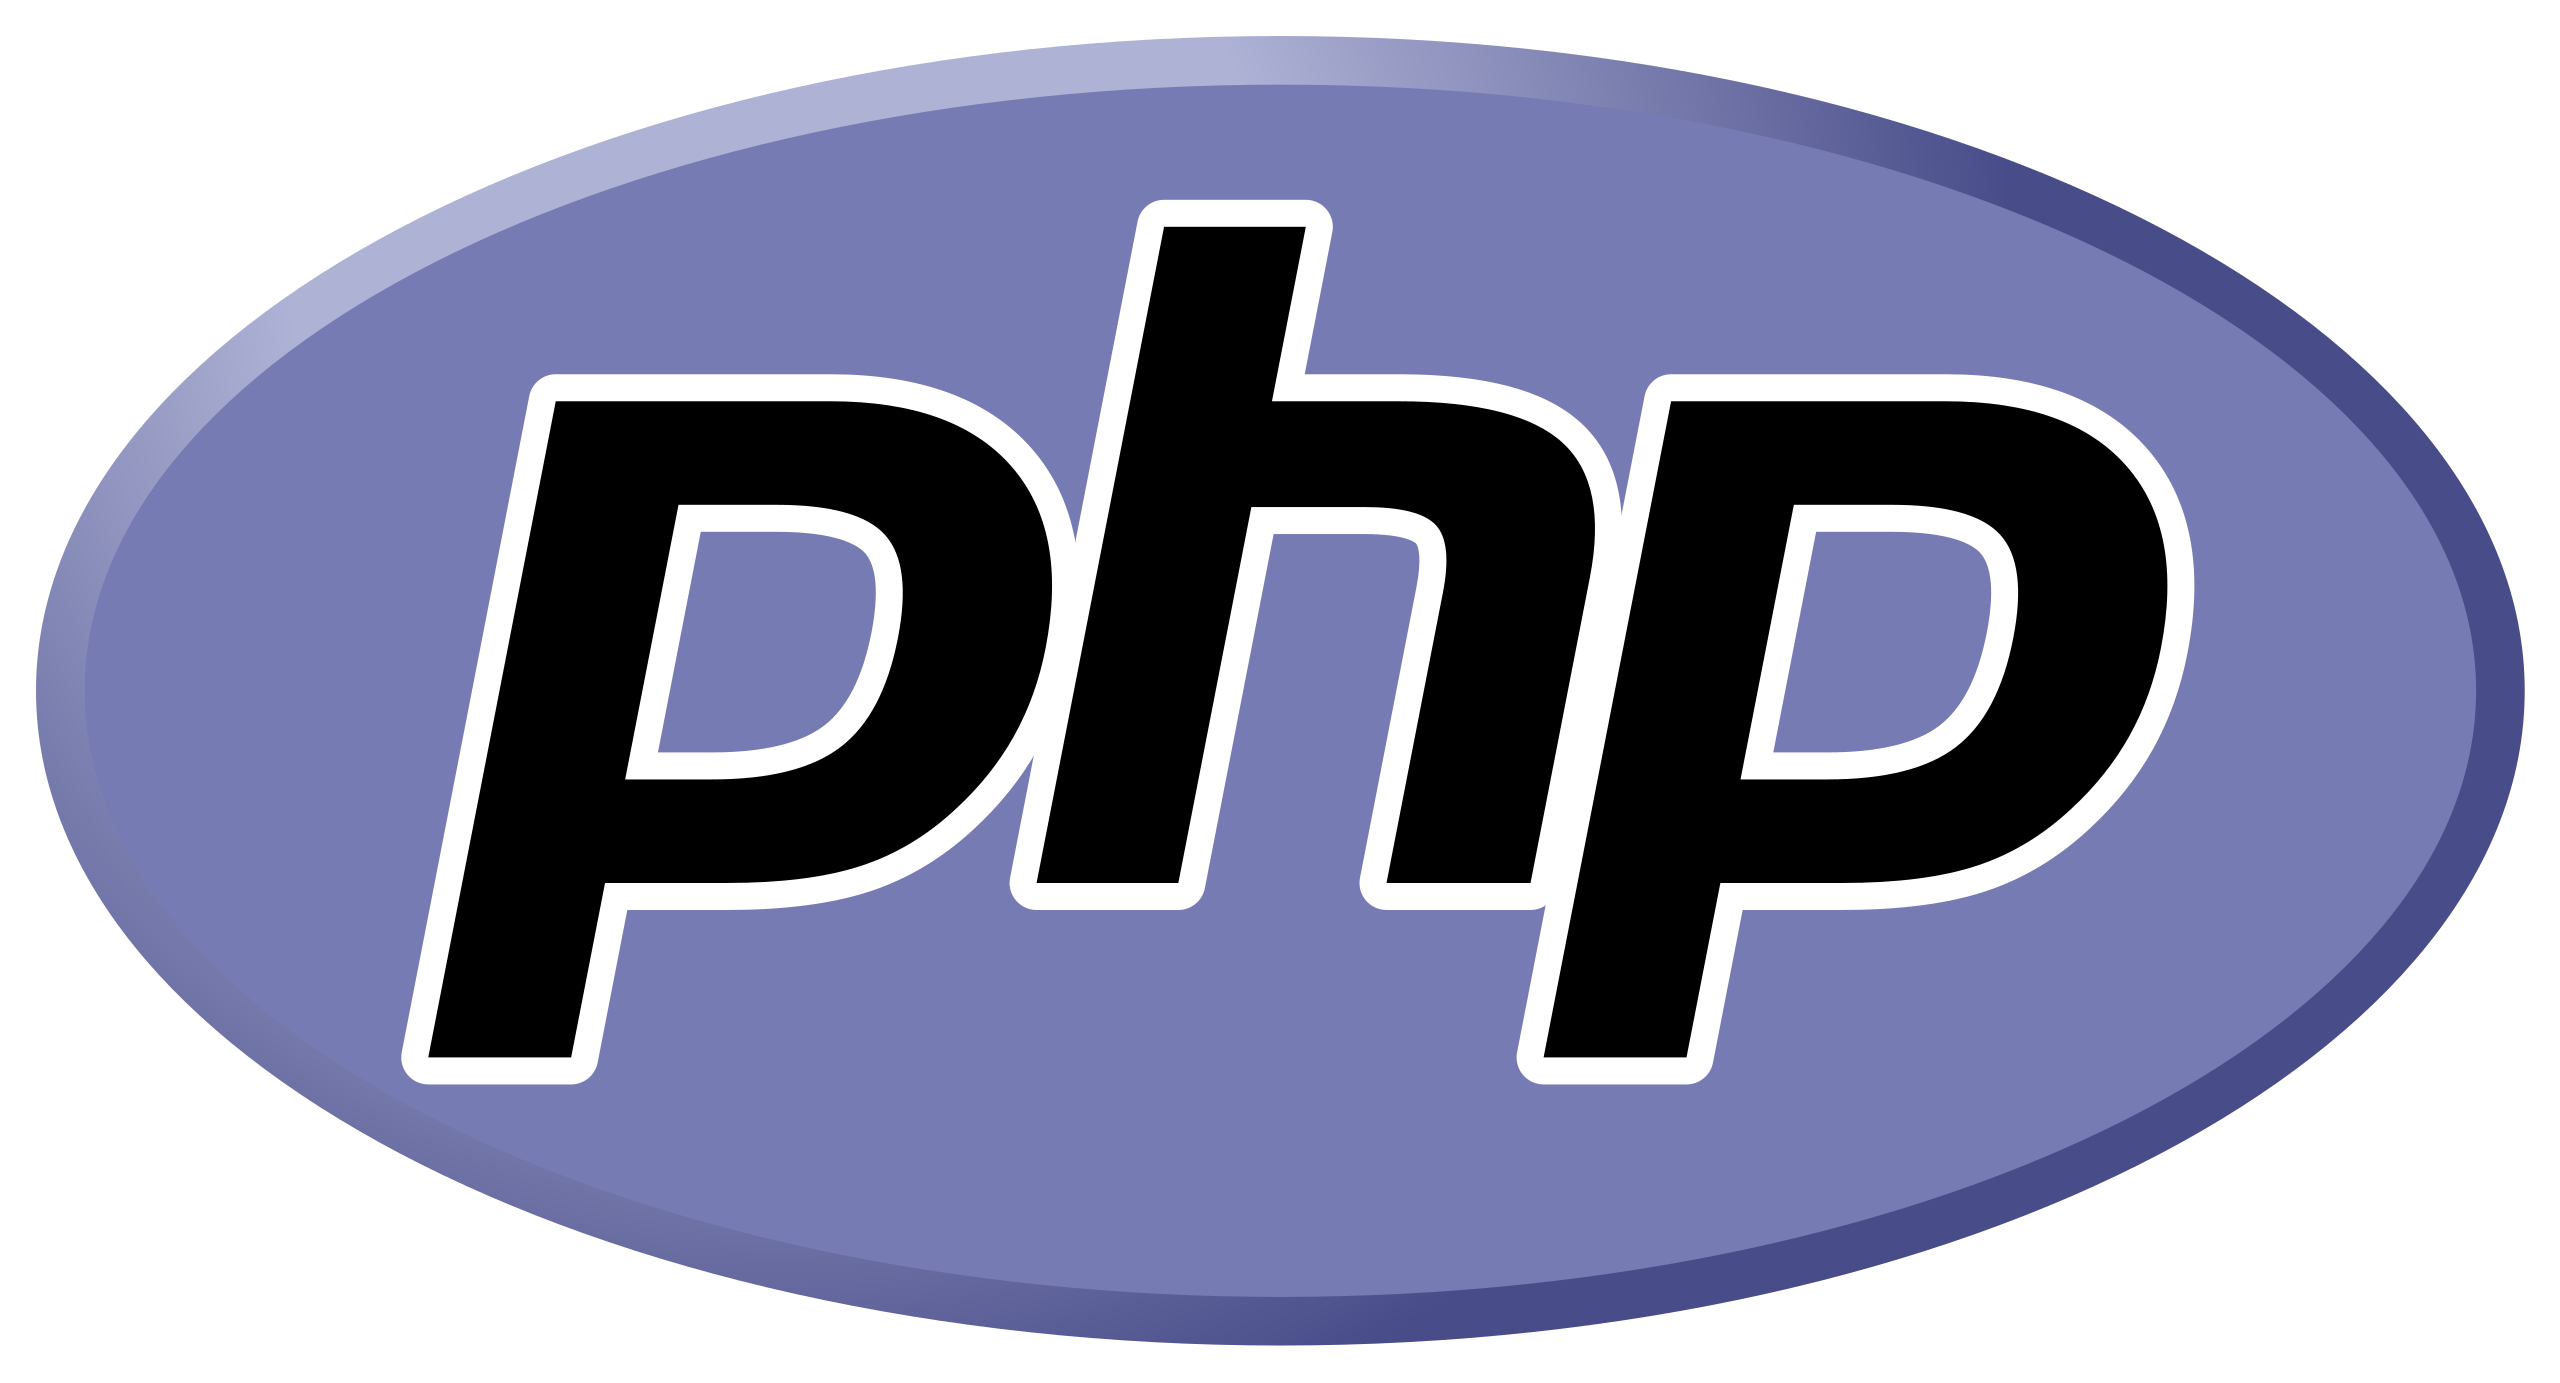 Website designs with php